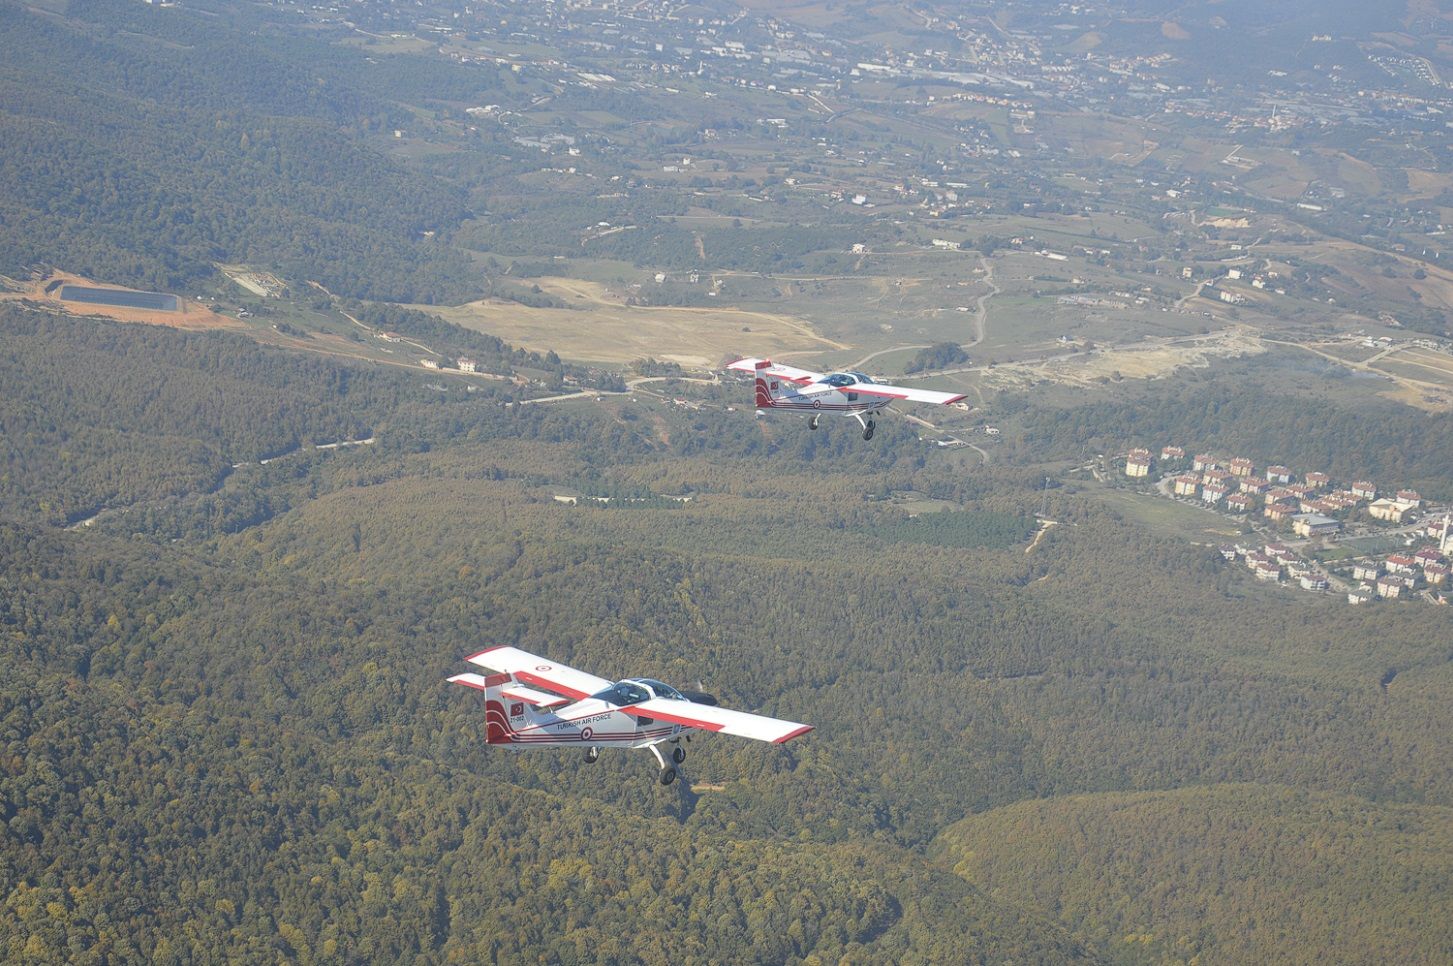 Super Mushshak Delivery to the Turkish Air Force